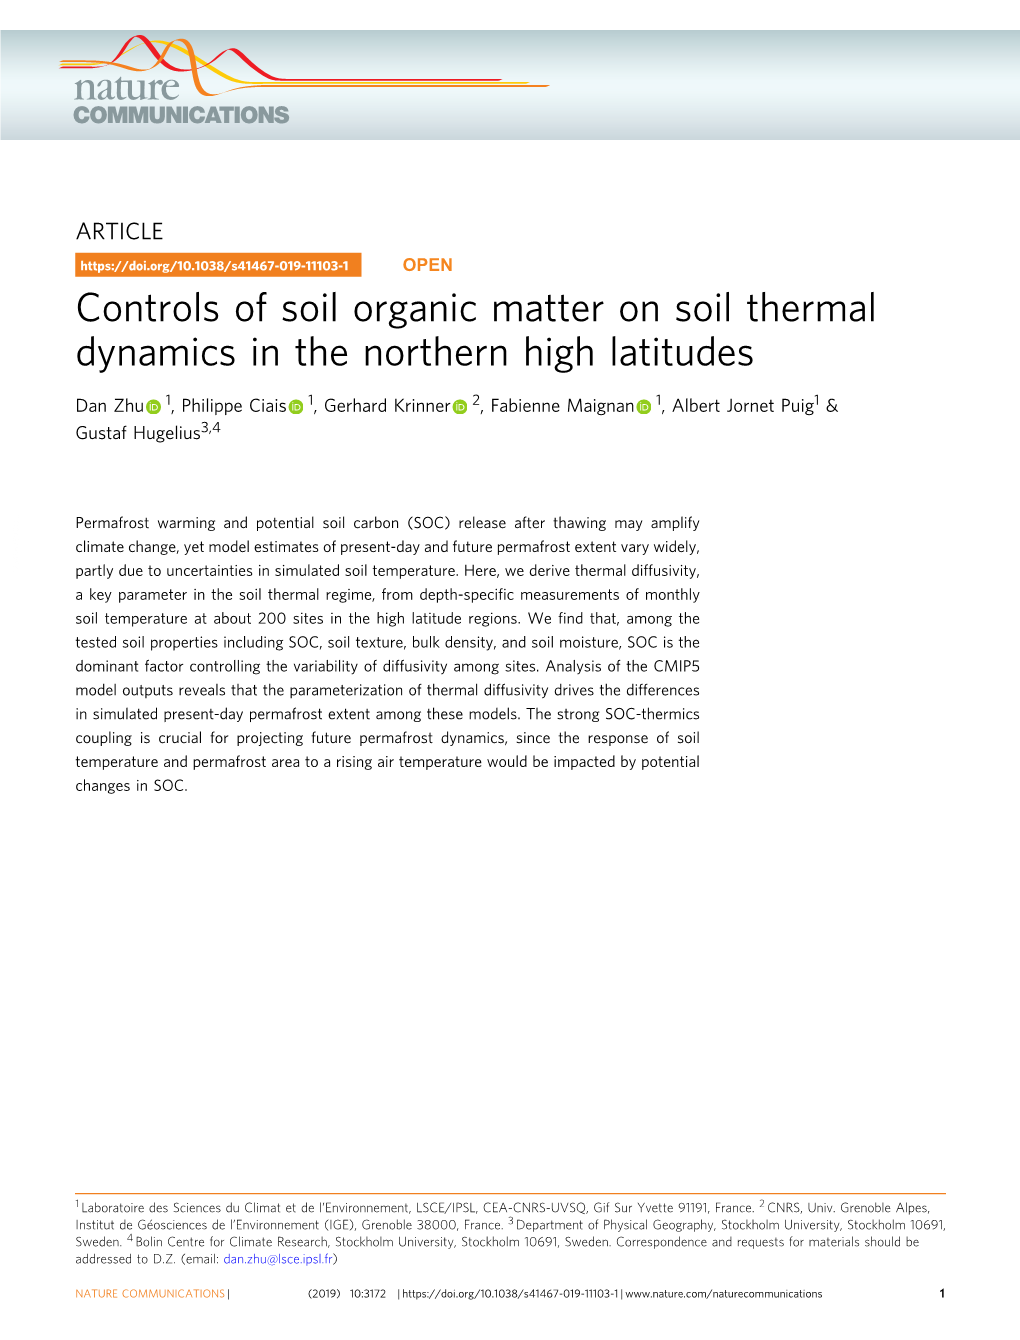 Controls of Soil Organic Matter on Soil Thermal Dynamics in the Northern High Latitudes